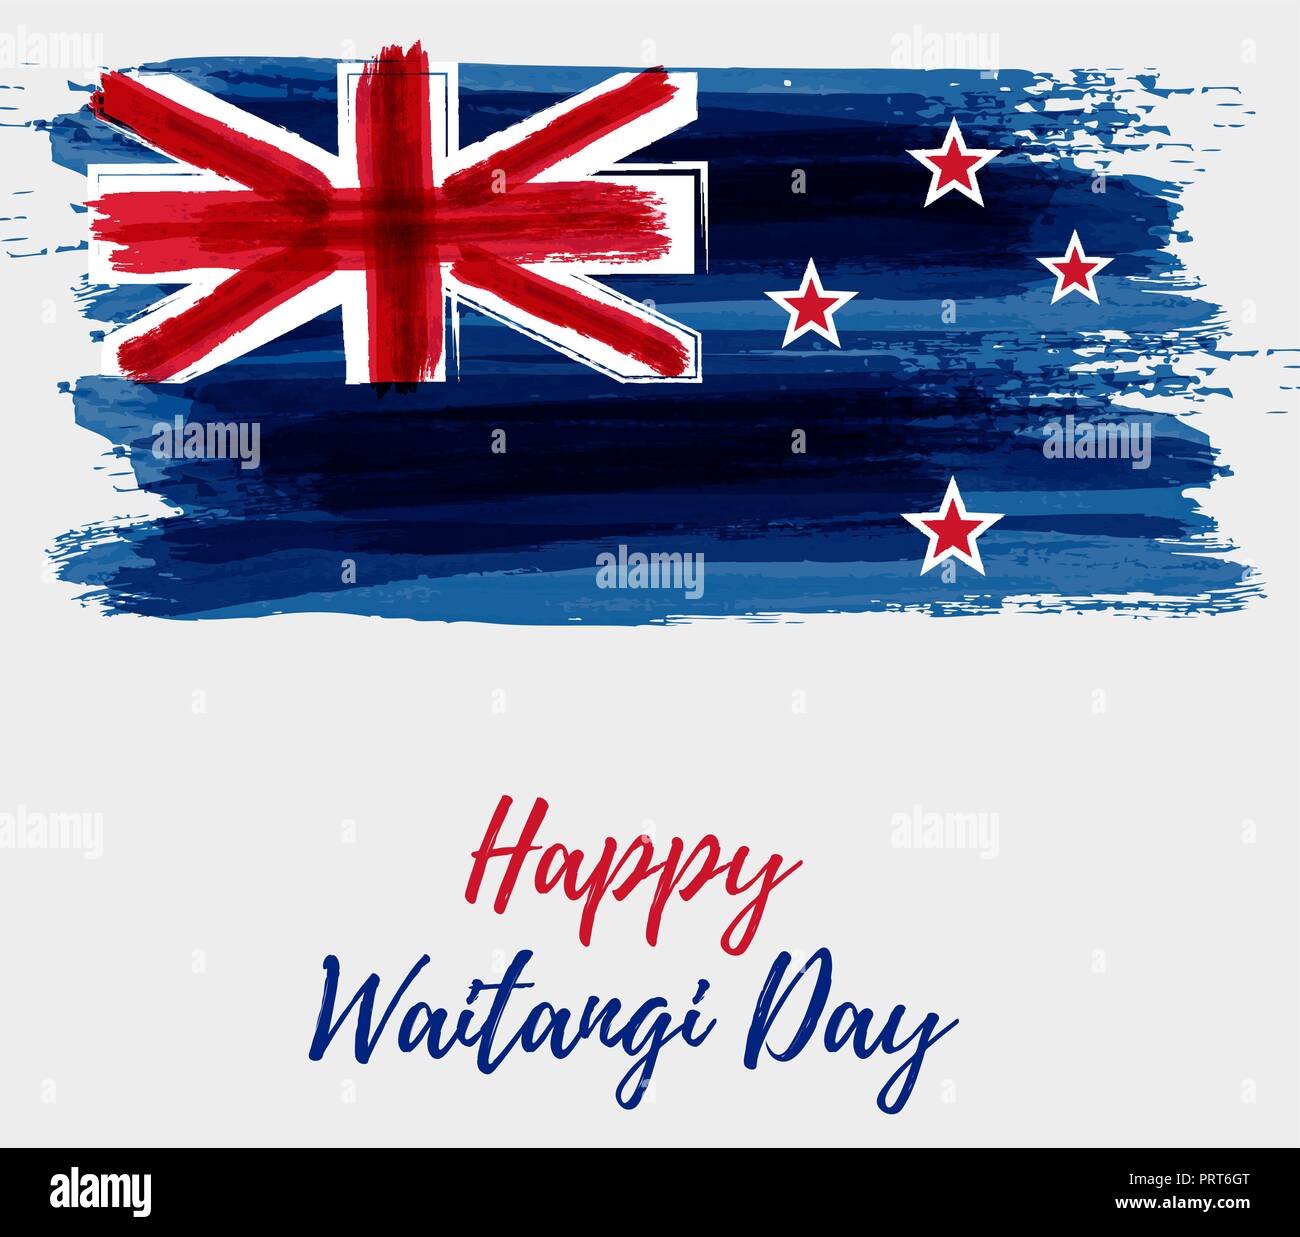 Happy Waitangi day - New Zealand holiday. Abstract painted grunge flag of New Zealand. Template for holiday background, poster, banner, greeting card, Stock Vector